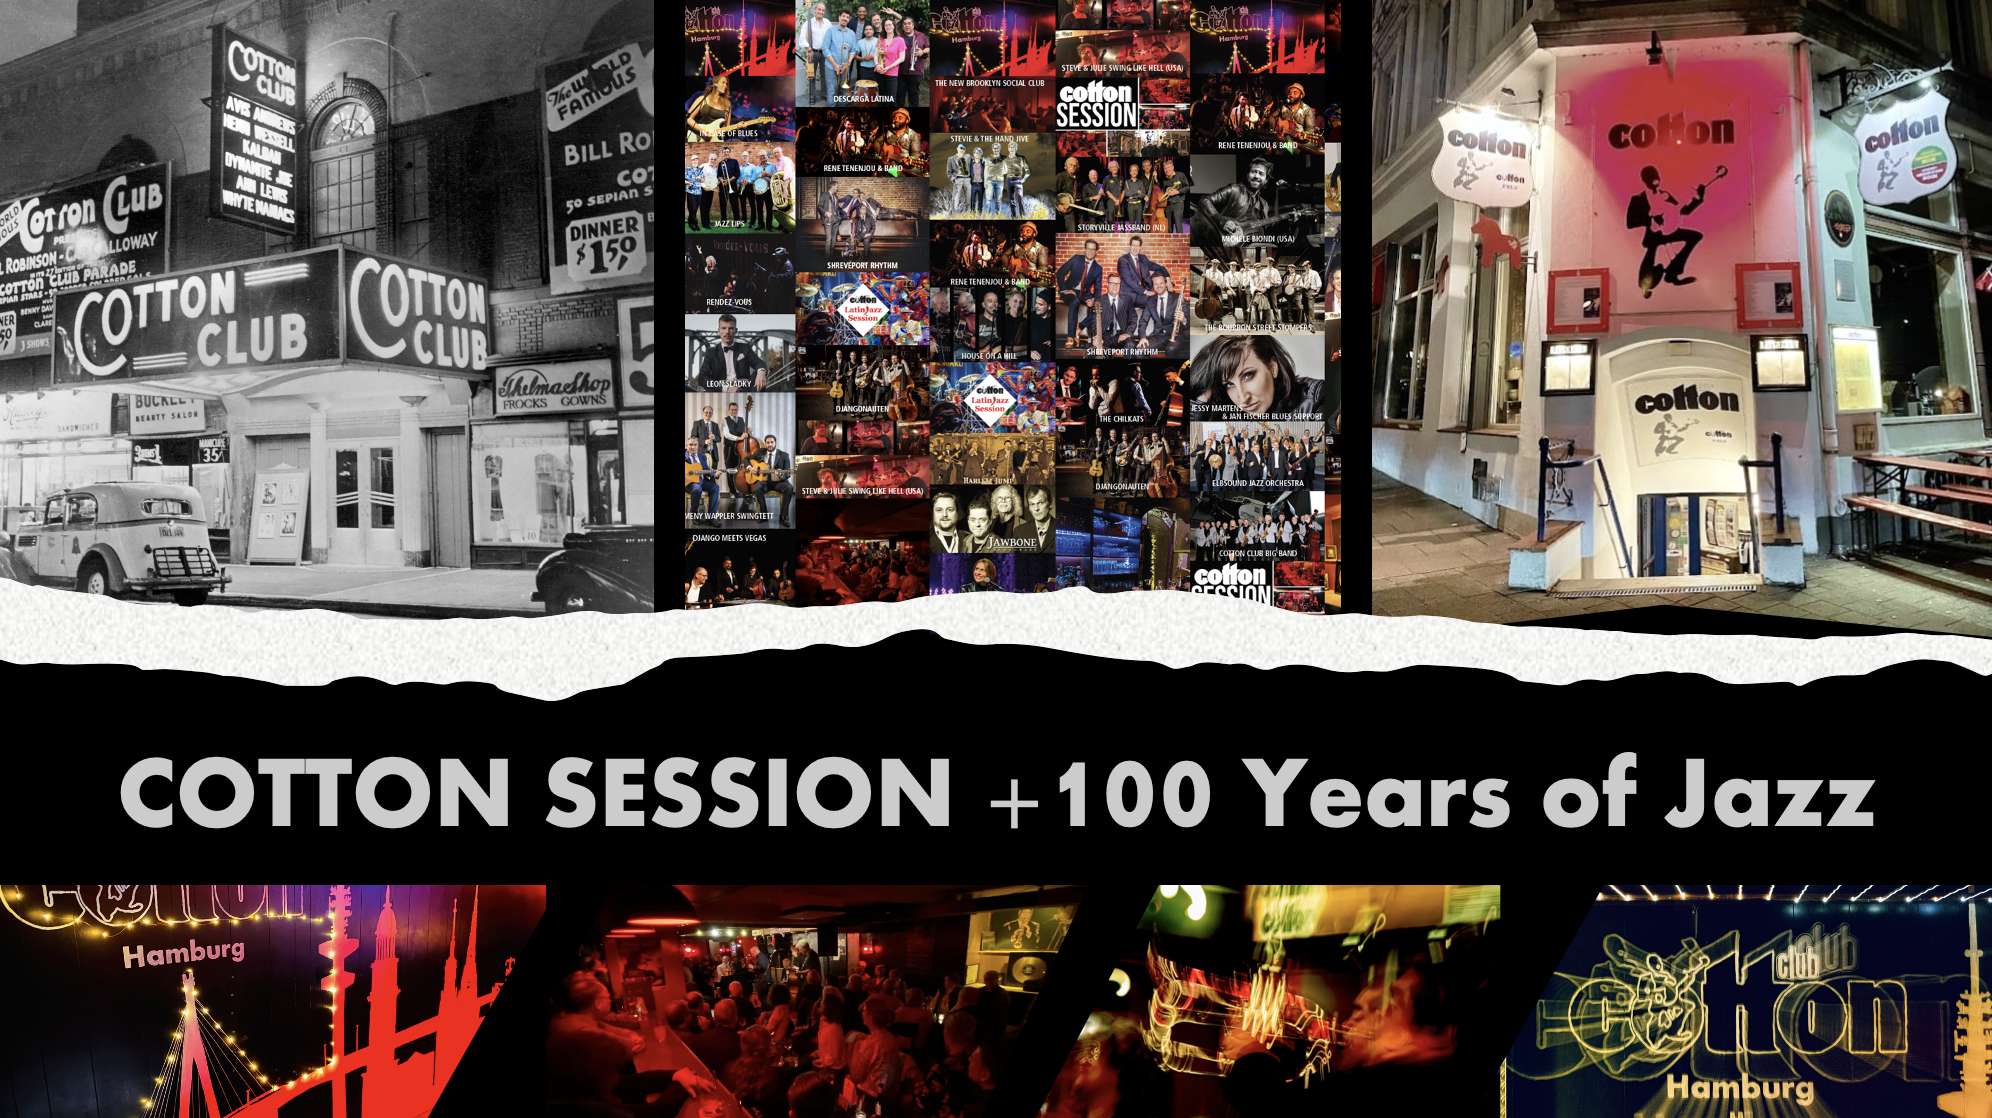 COTTON SESSION +100 YEARS OF JAZZ - led by Stefan Maus (Mainstream)